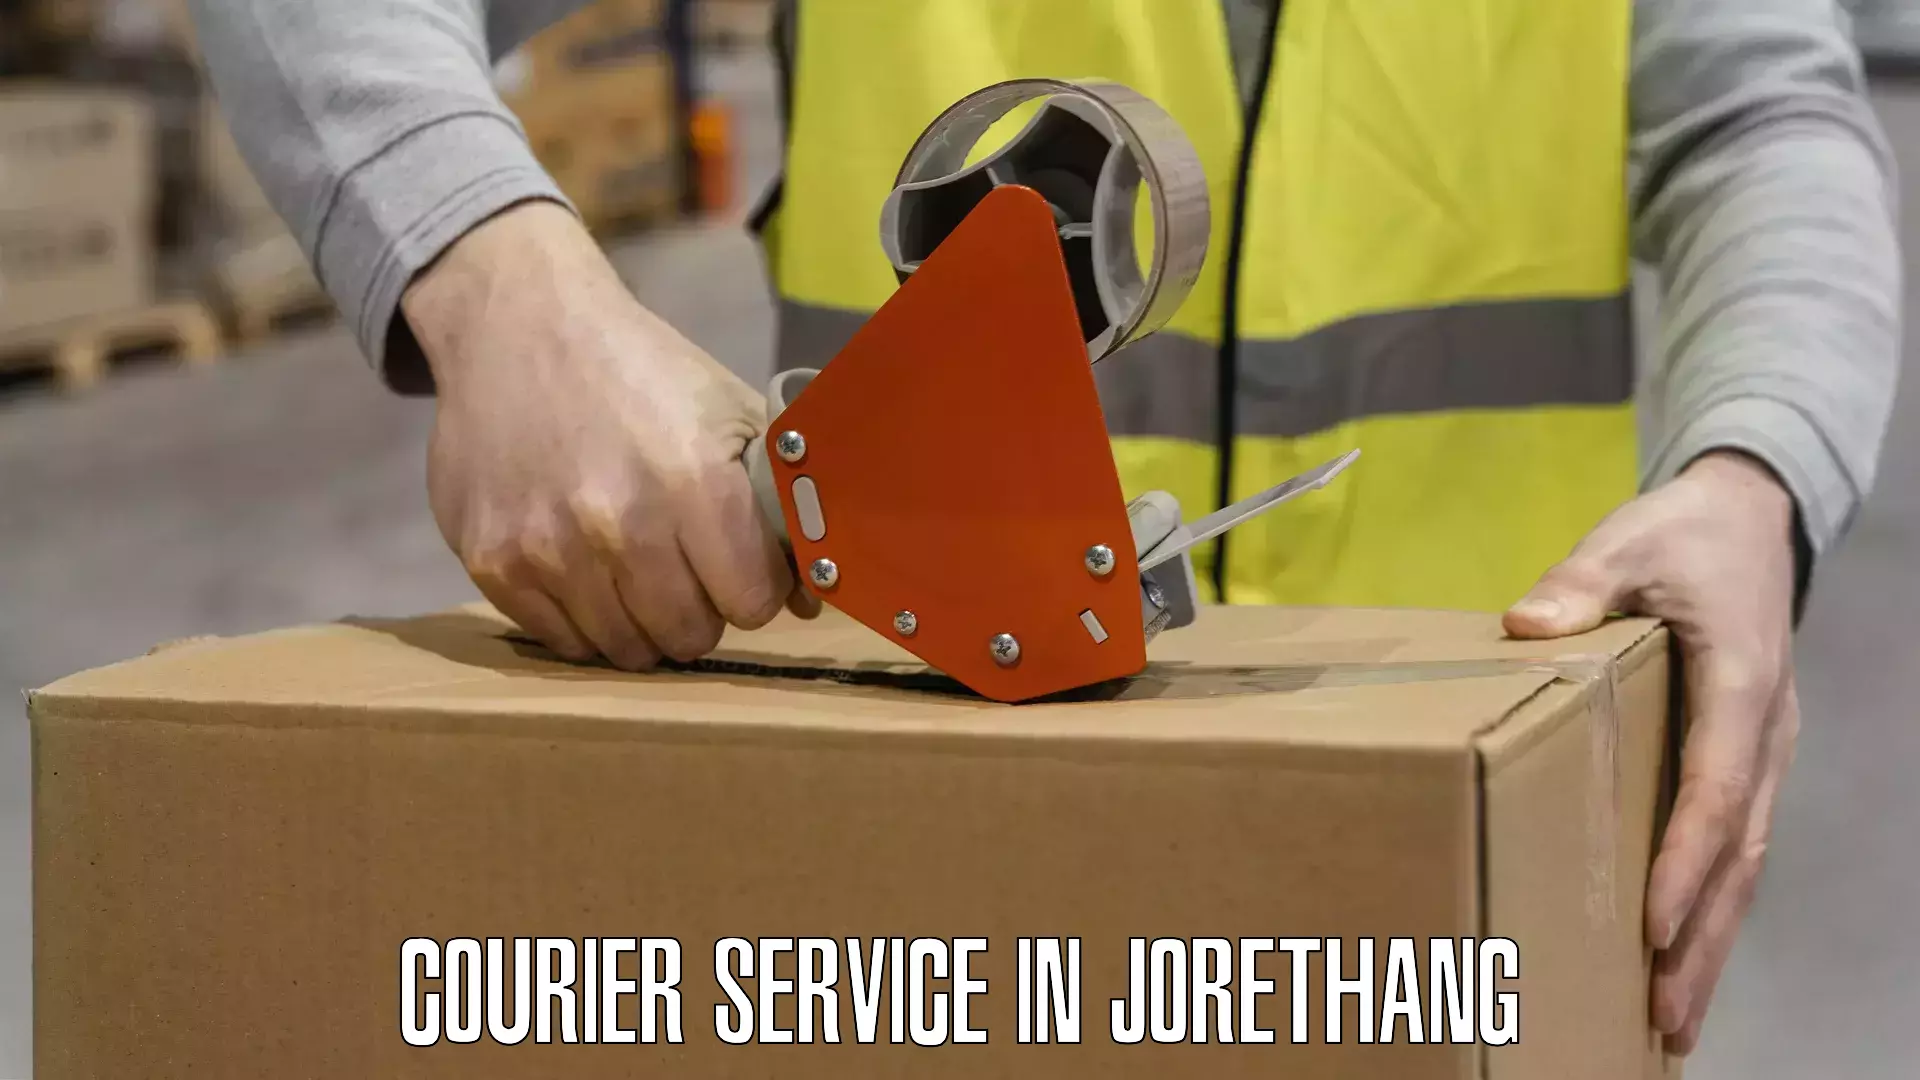 Customer-friendly courier services in Jorethang